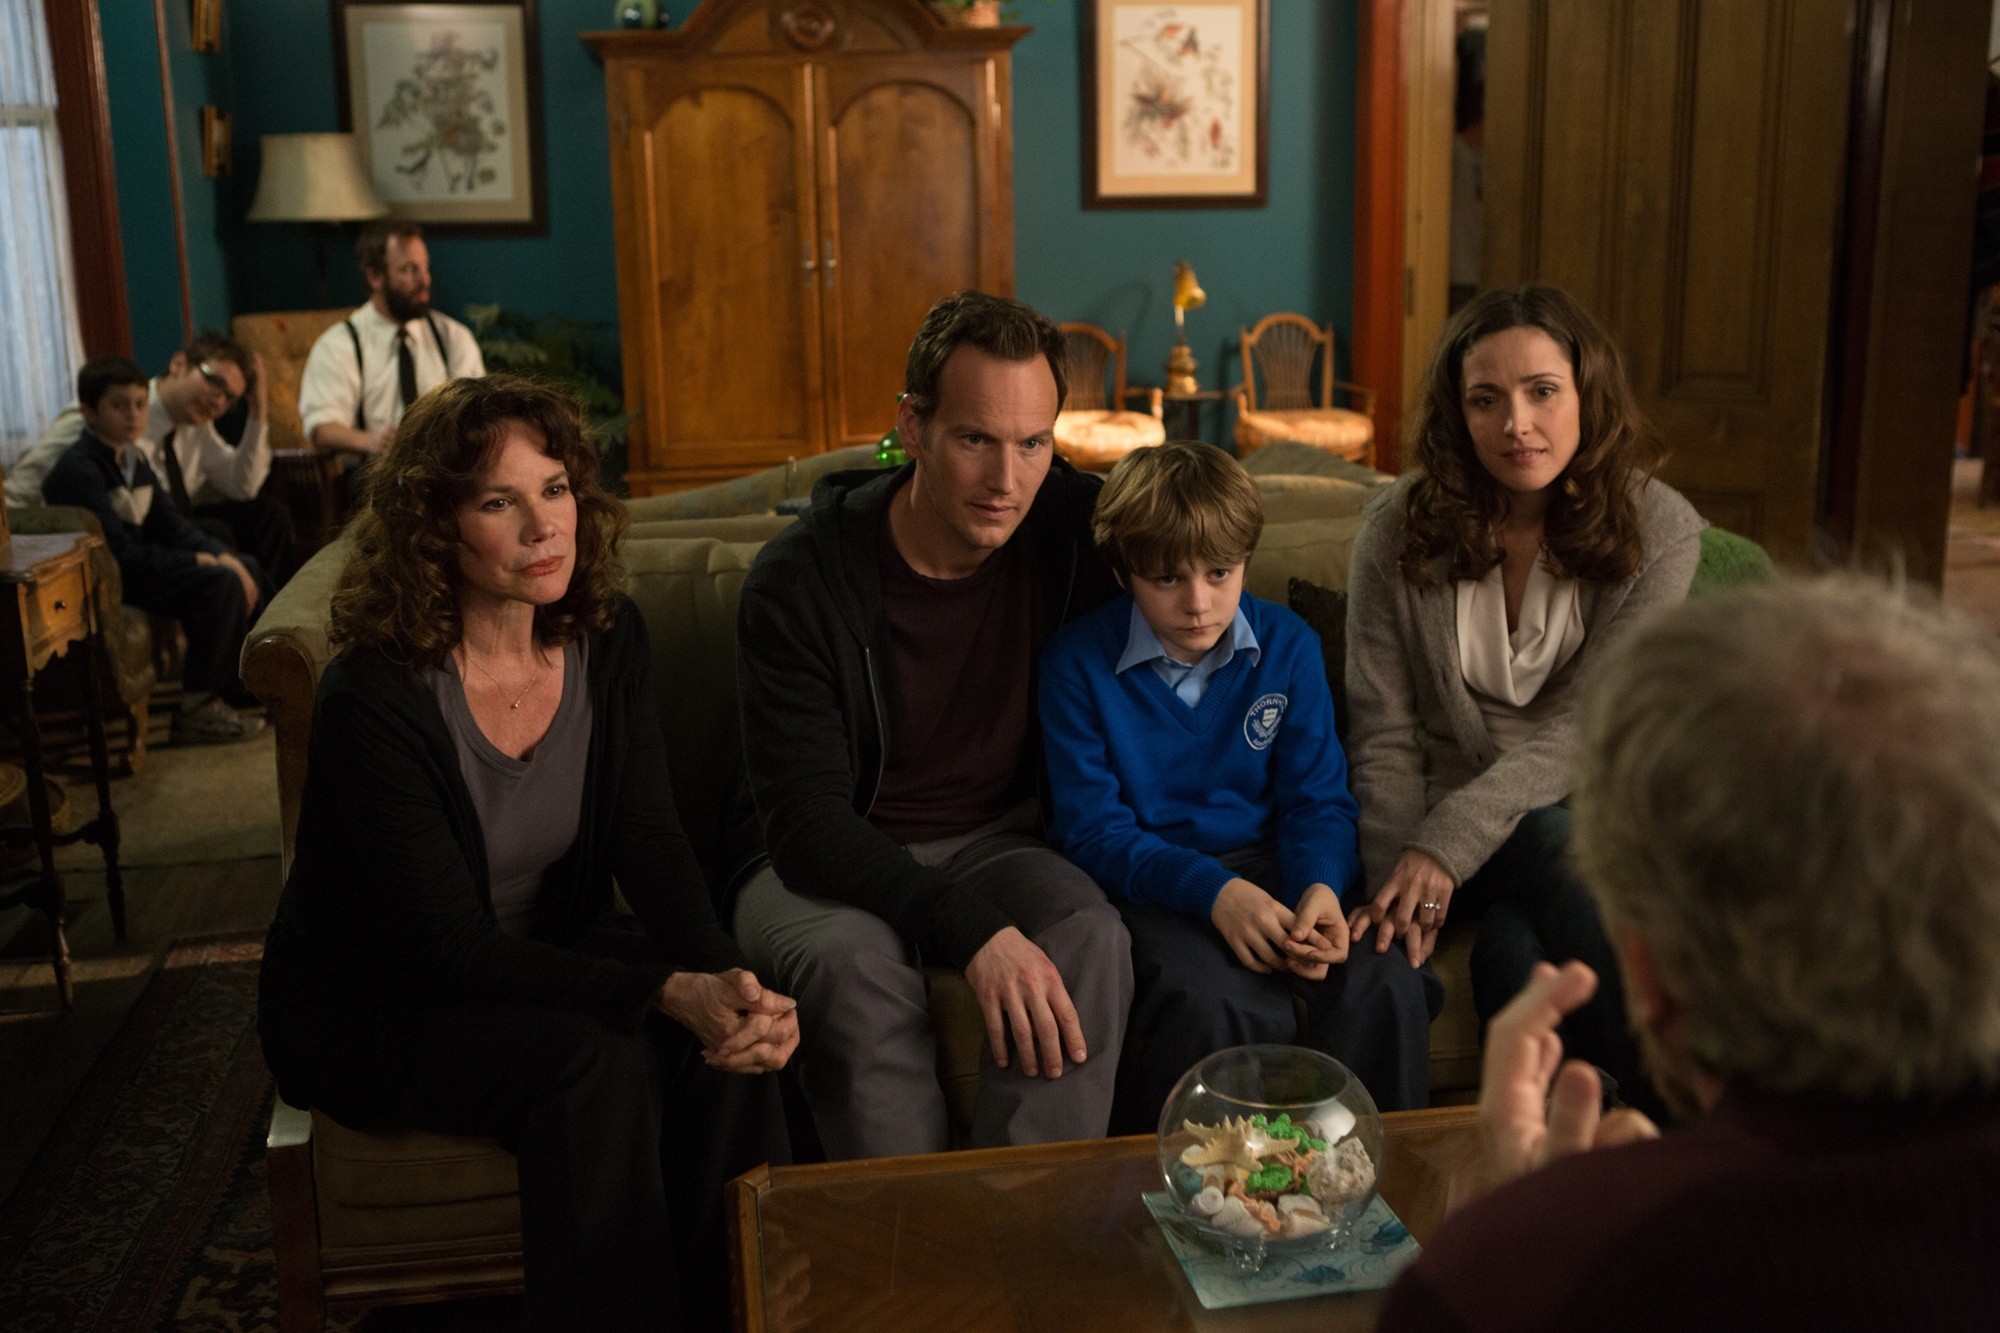 Barbara Hershey, Patrick Wilson, Ty Simpkins and Rose Byrne in FilmDistrict's Insidious Chapter 2 (2013)